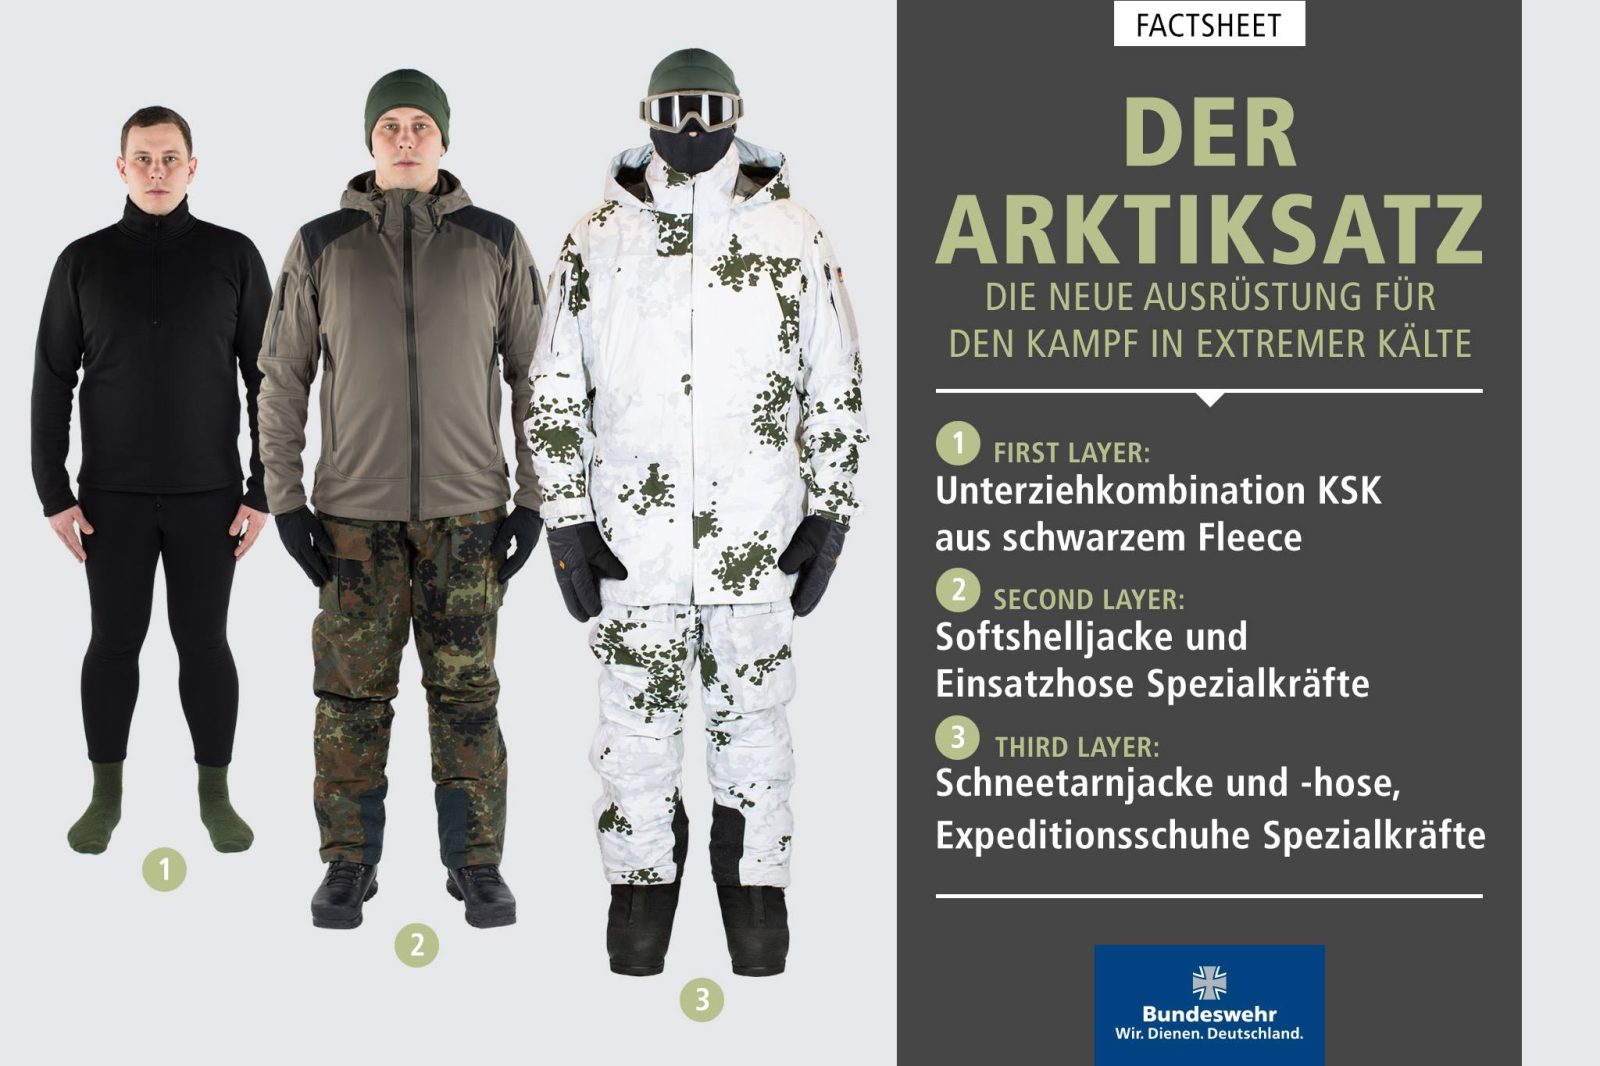 New Extreme Cold Weather Gear for the Bundeswehr –